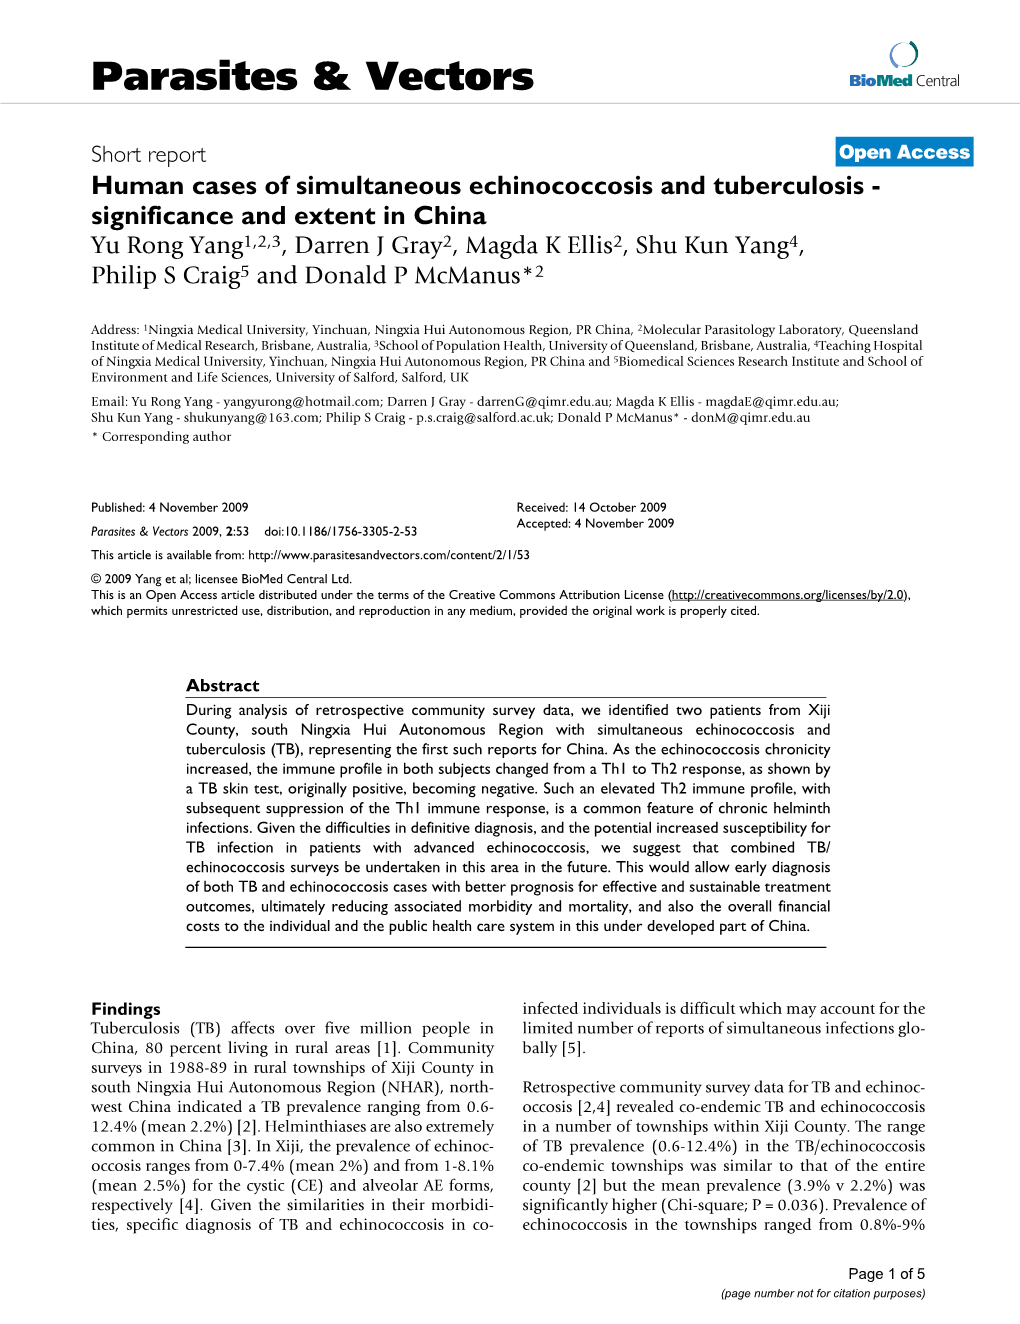 Human Cases of Simultaneous Echinococcosis and Tuberculosis-Significance and Extent in China